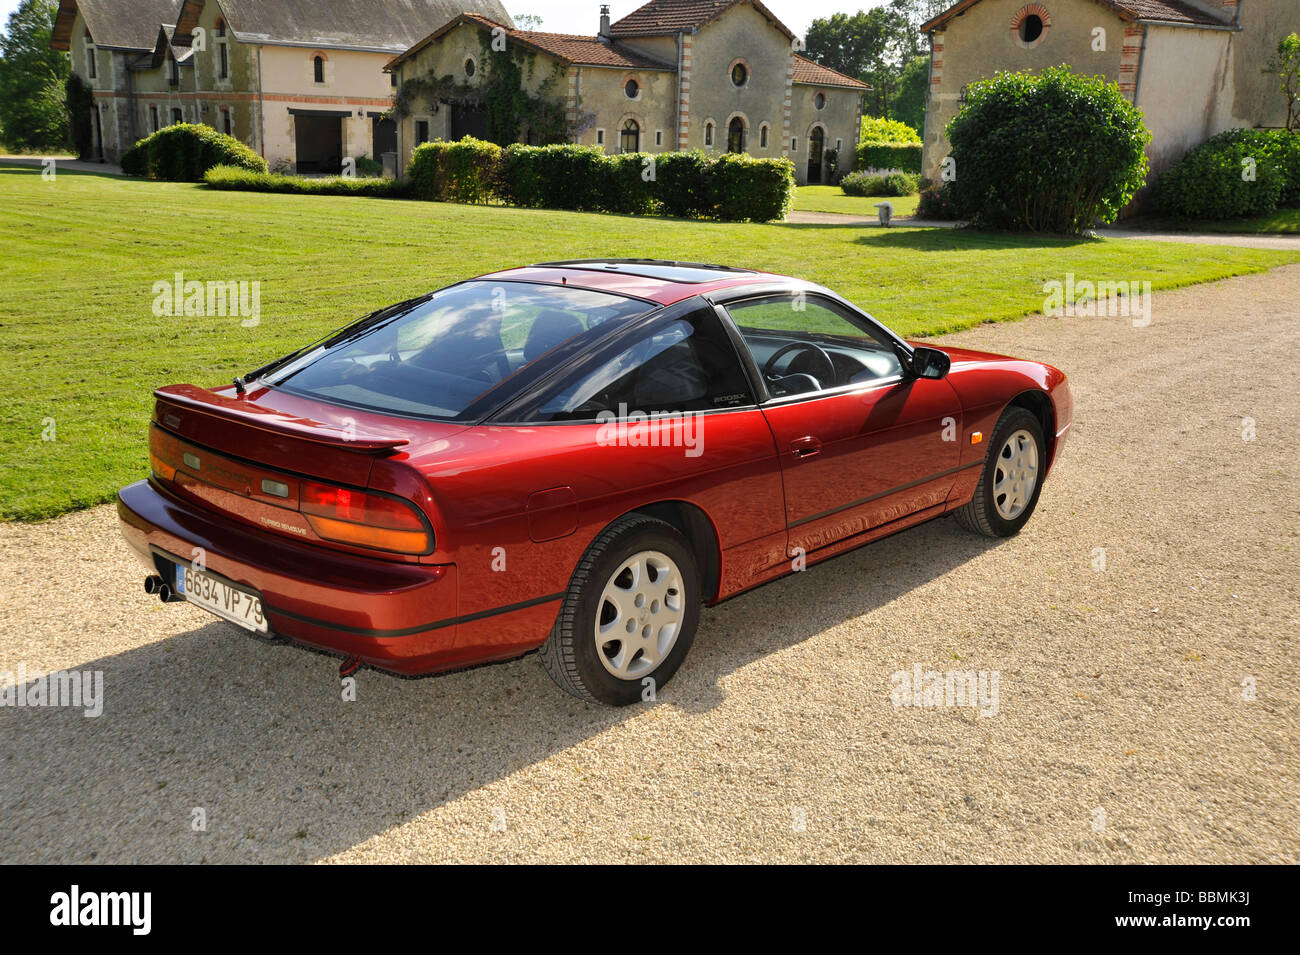 Japanese Nissan 200sx Sport Coupe Stock Photo